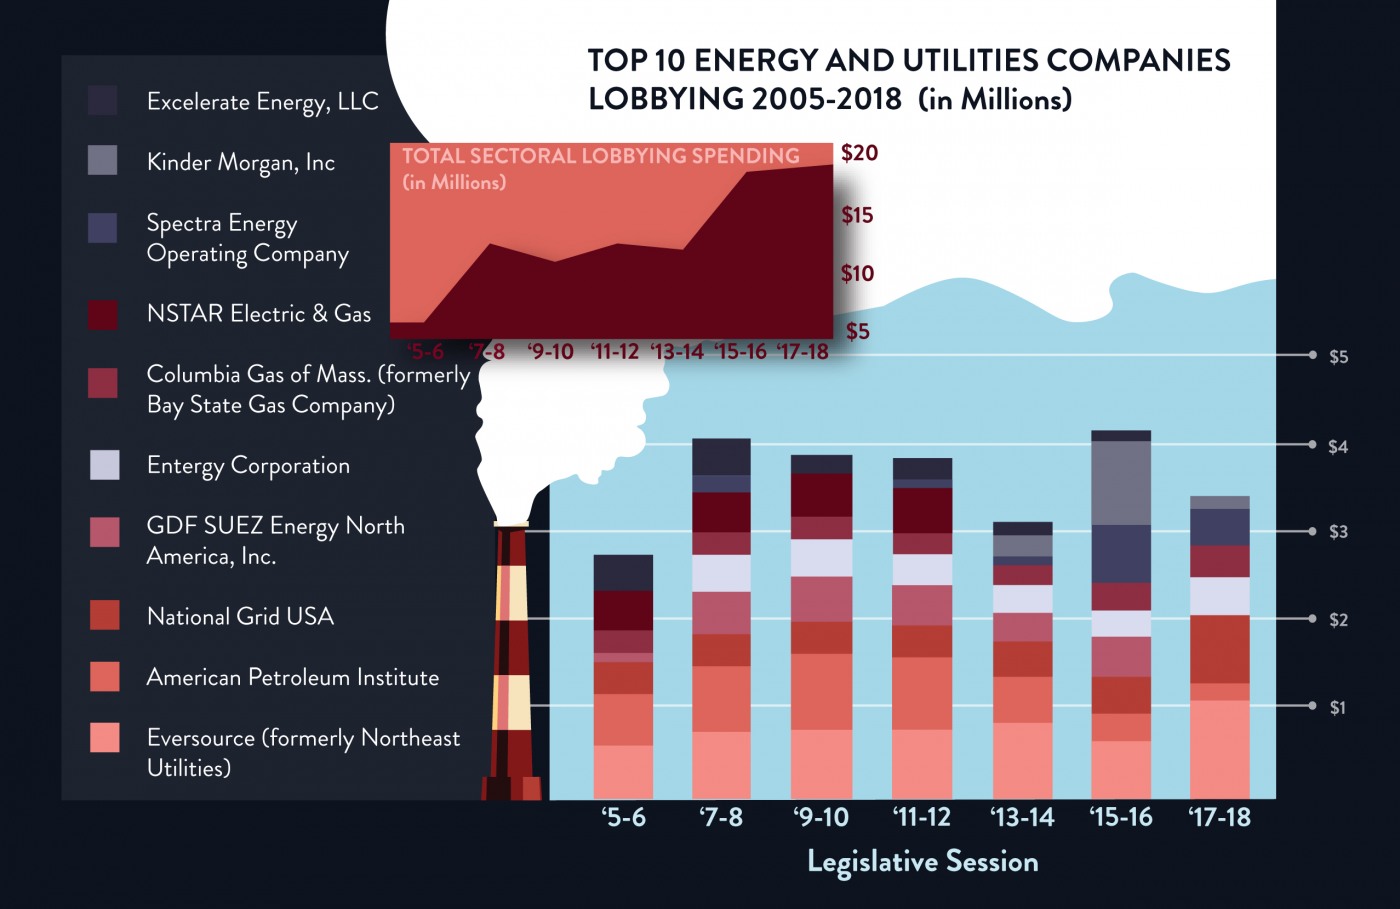 Lobbying in Massachusetts by energy and utility companies, 2005-18.